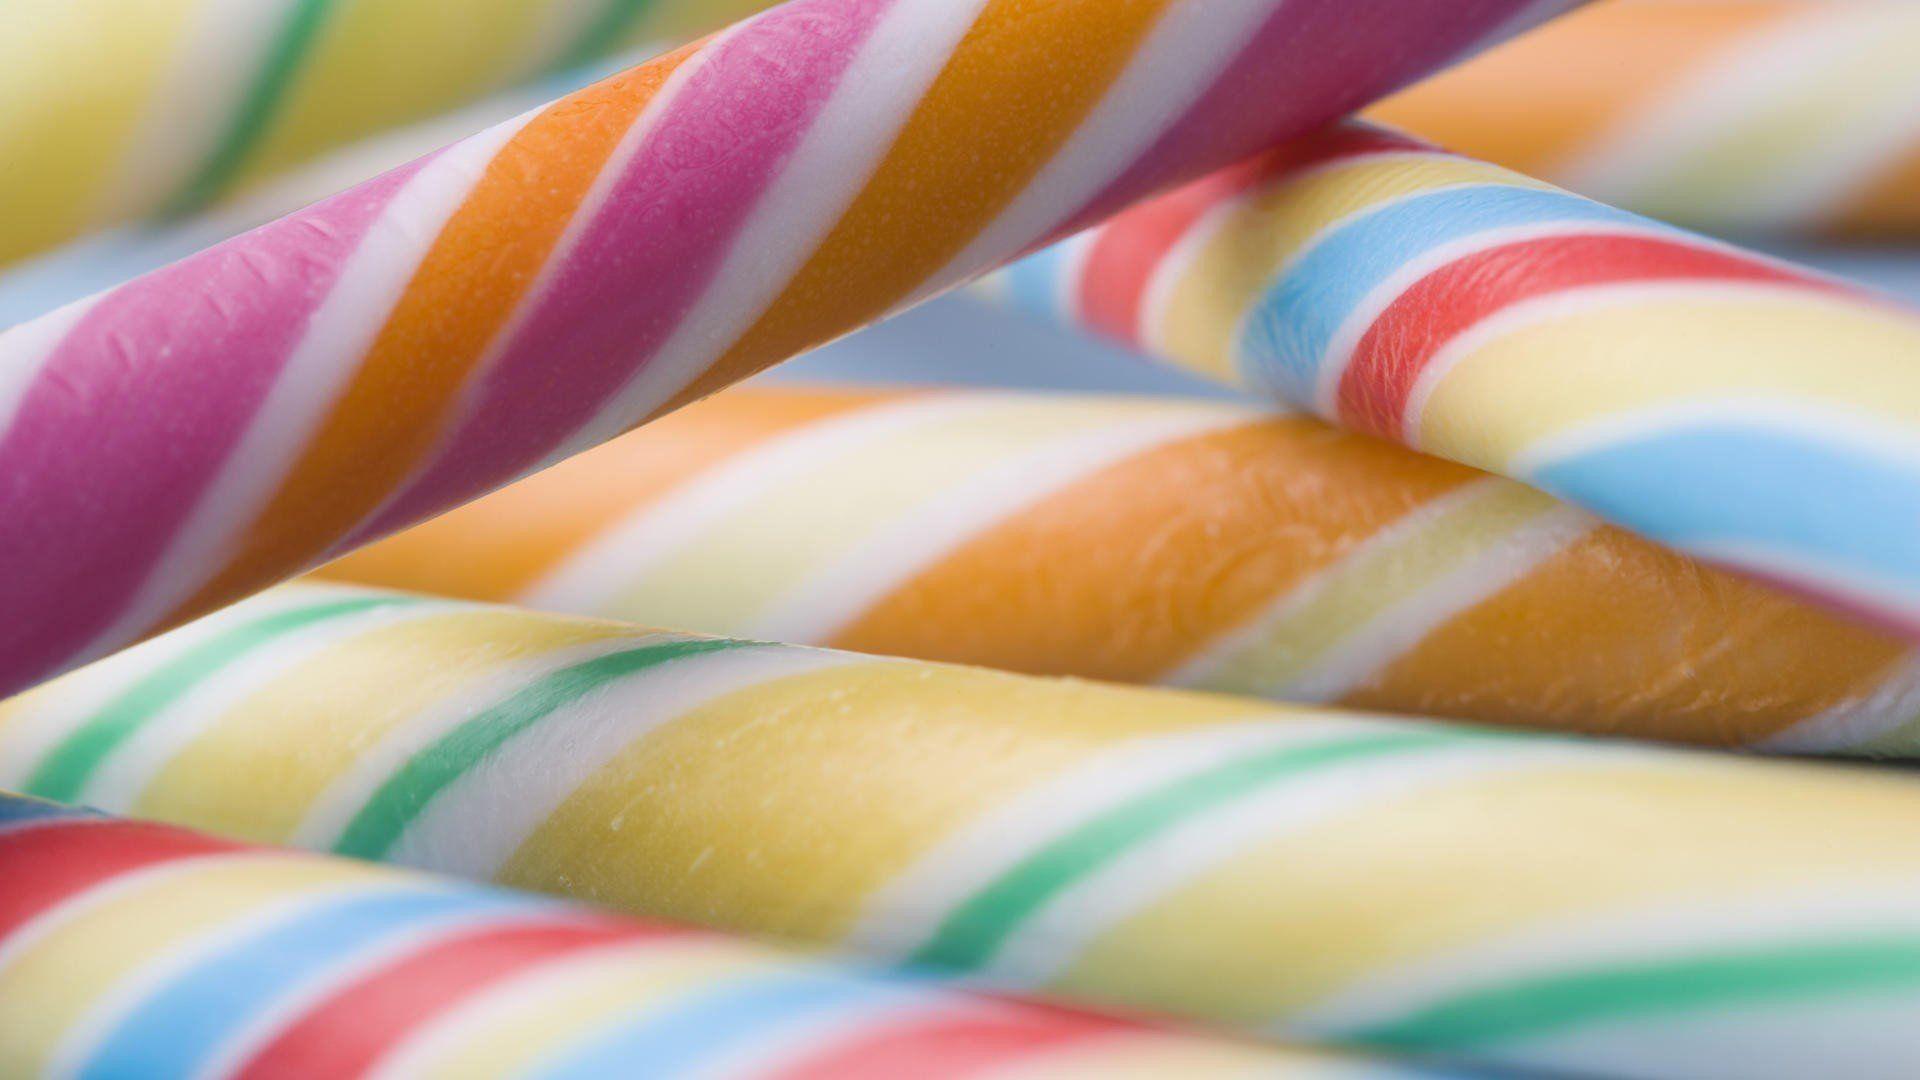 Colorful Candies Wallpaper 44465 1920x1080 px